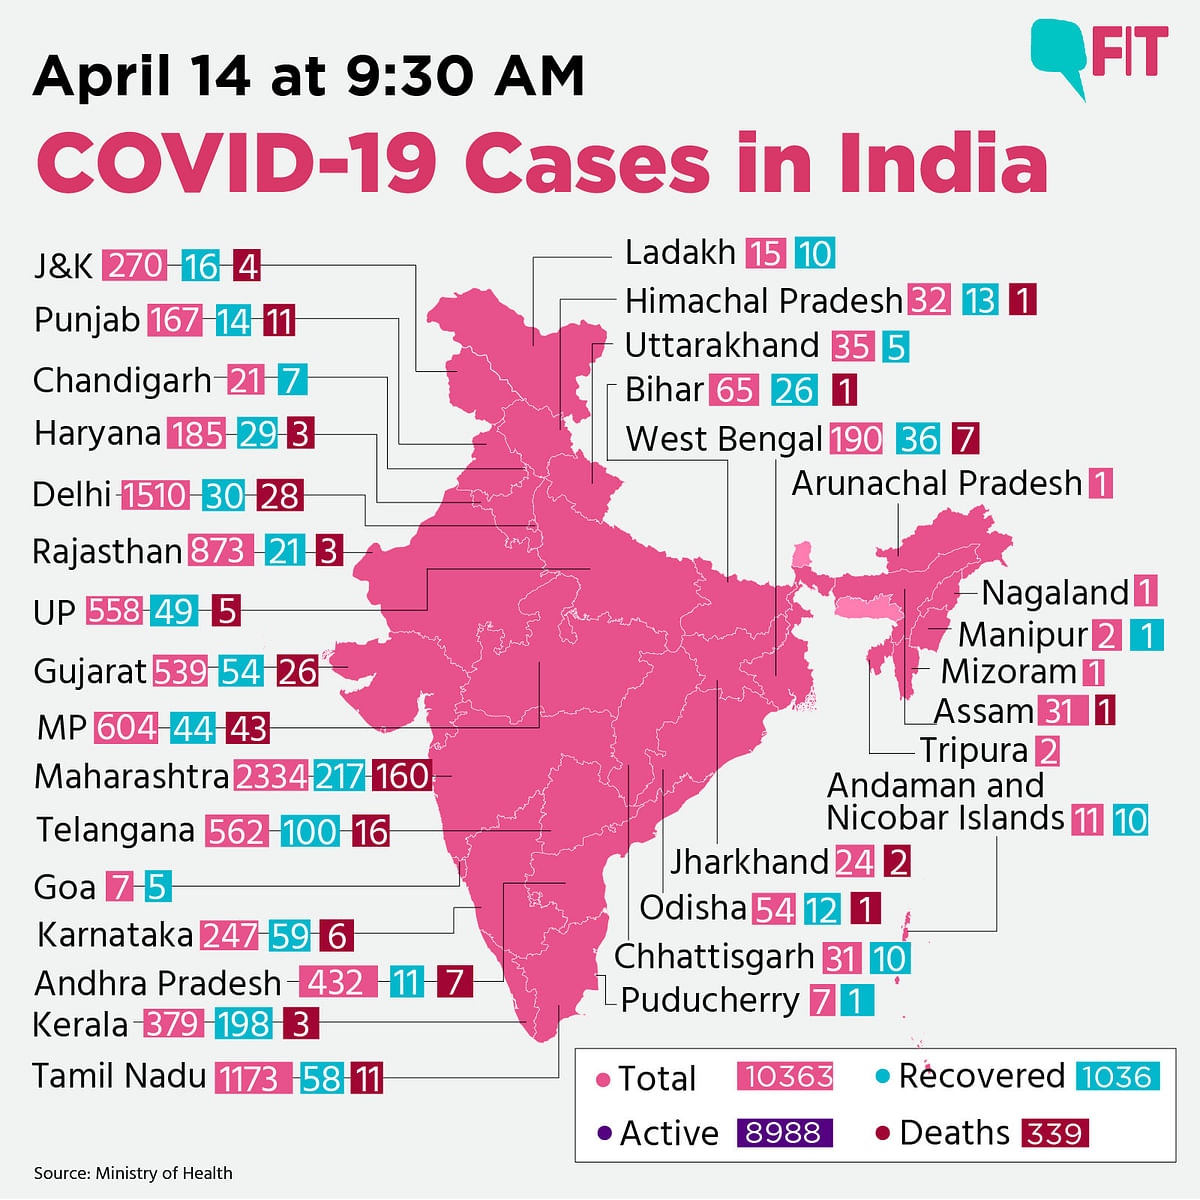 India COVID-19 Update: Cases Cross 10,000 Mark, Death Toll at 339